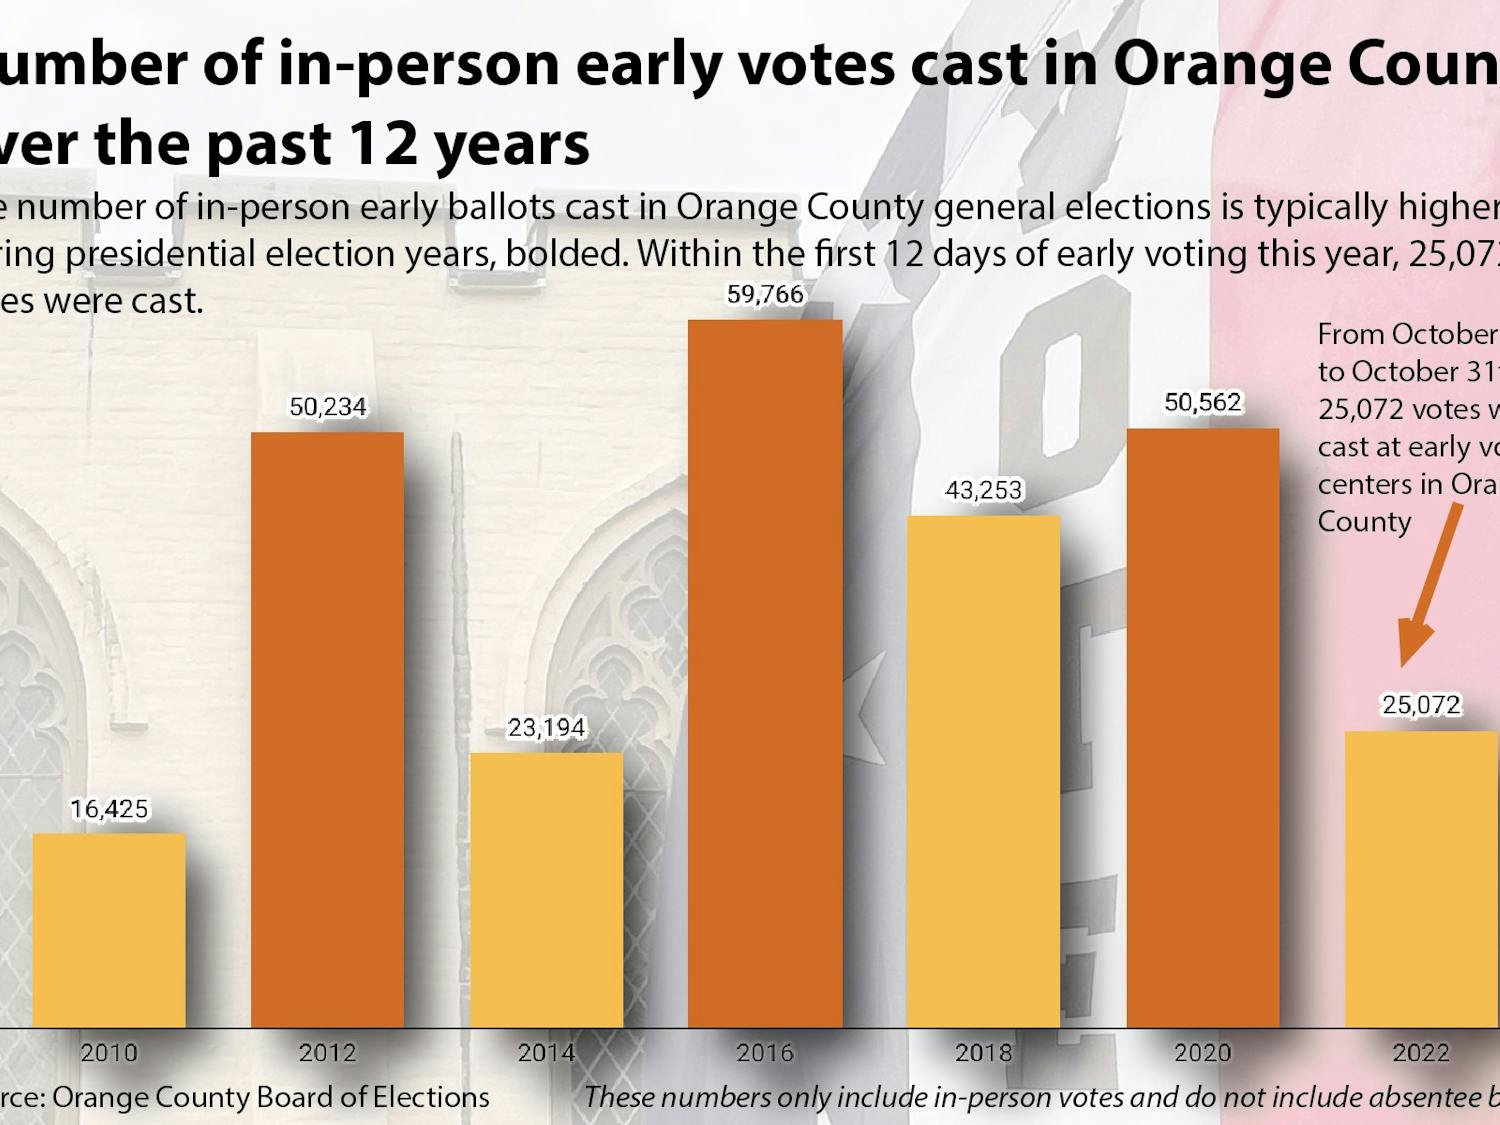 Number of in-person early votes cast in Orange County over the past 12 years